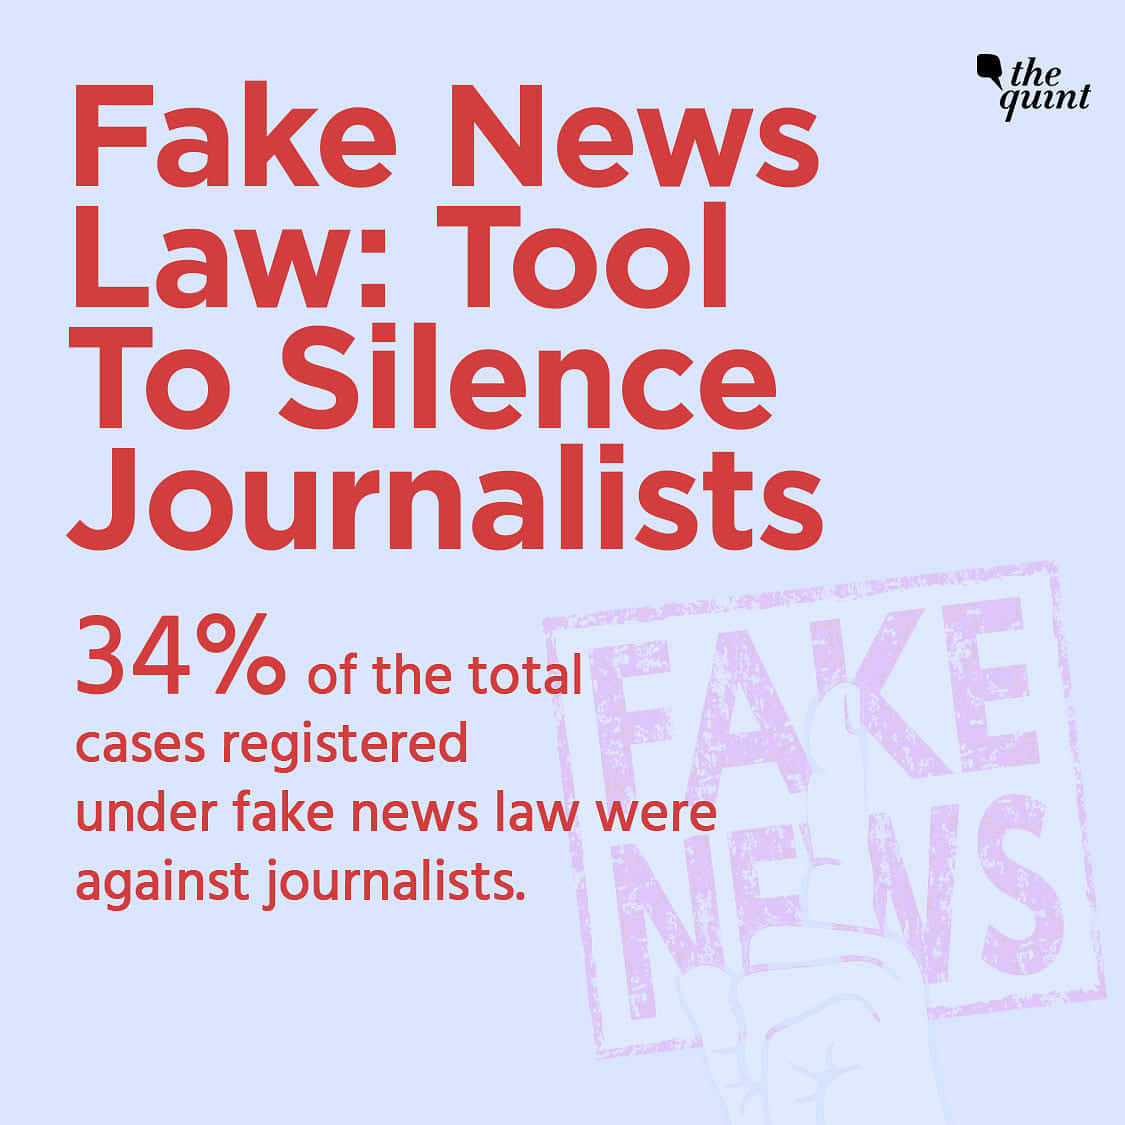 In UP, 'fake news' has become a form of political punishment to gag journalists who speak truth to power.